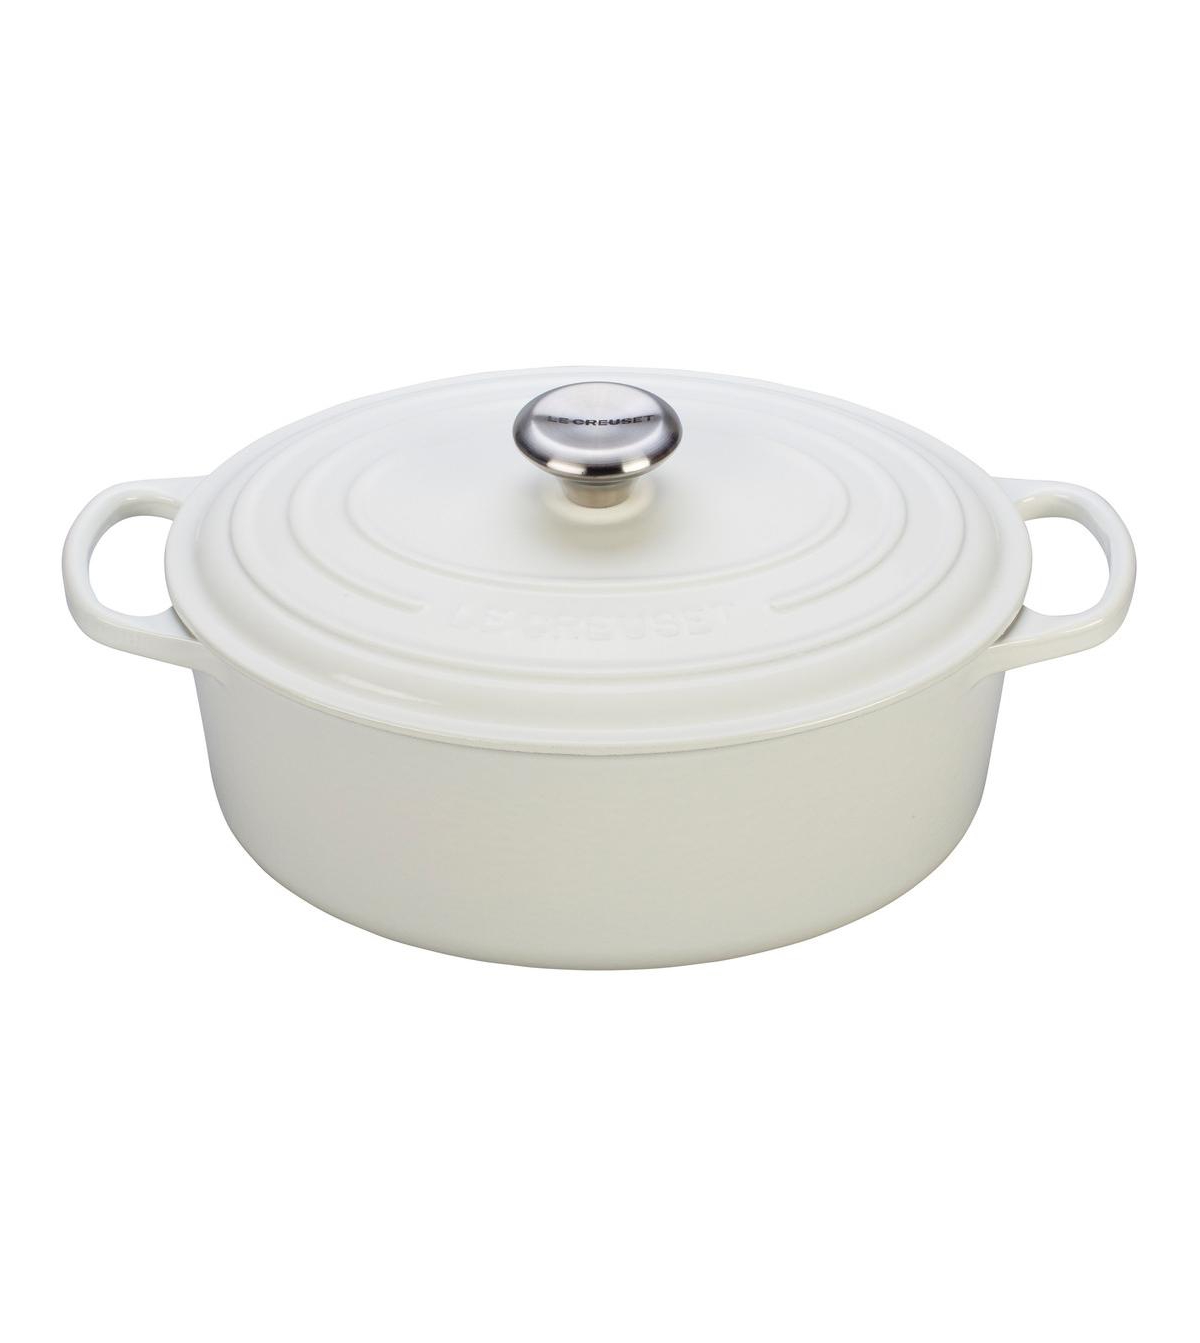 Le Creuset 5 Quart Enameled Cast Iron Oval Dutch Oven In White